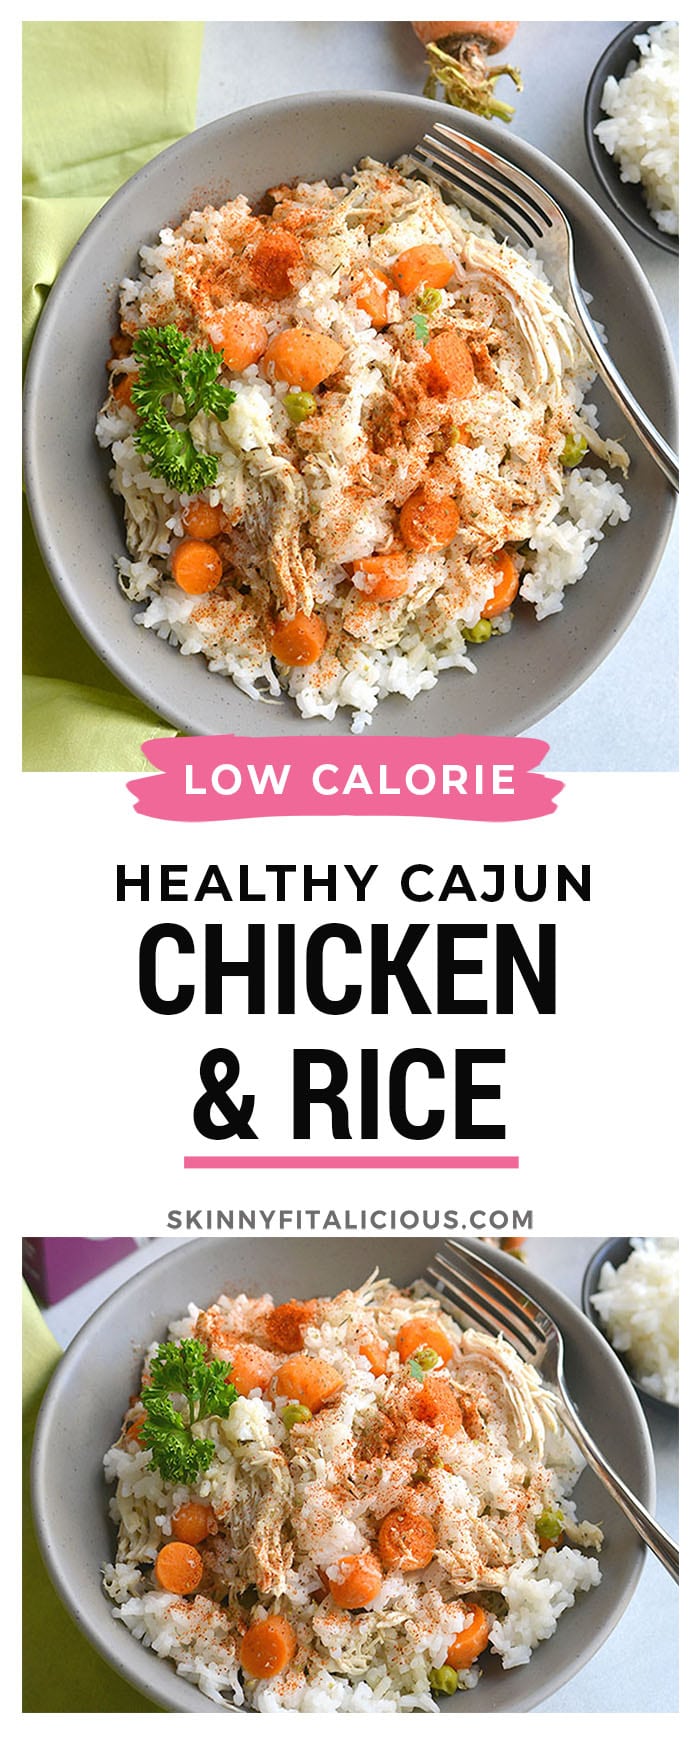 Instant Pot Cajun Chicken and Rice! Cajun flavors meet wholesome ingredients in this comforting dinner recipe. An easy, 30-minute meal for busy nights.